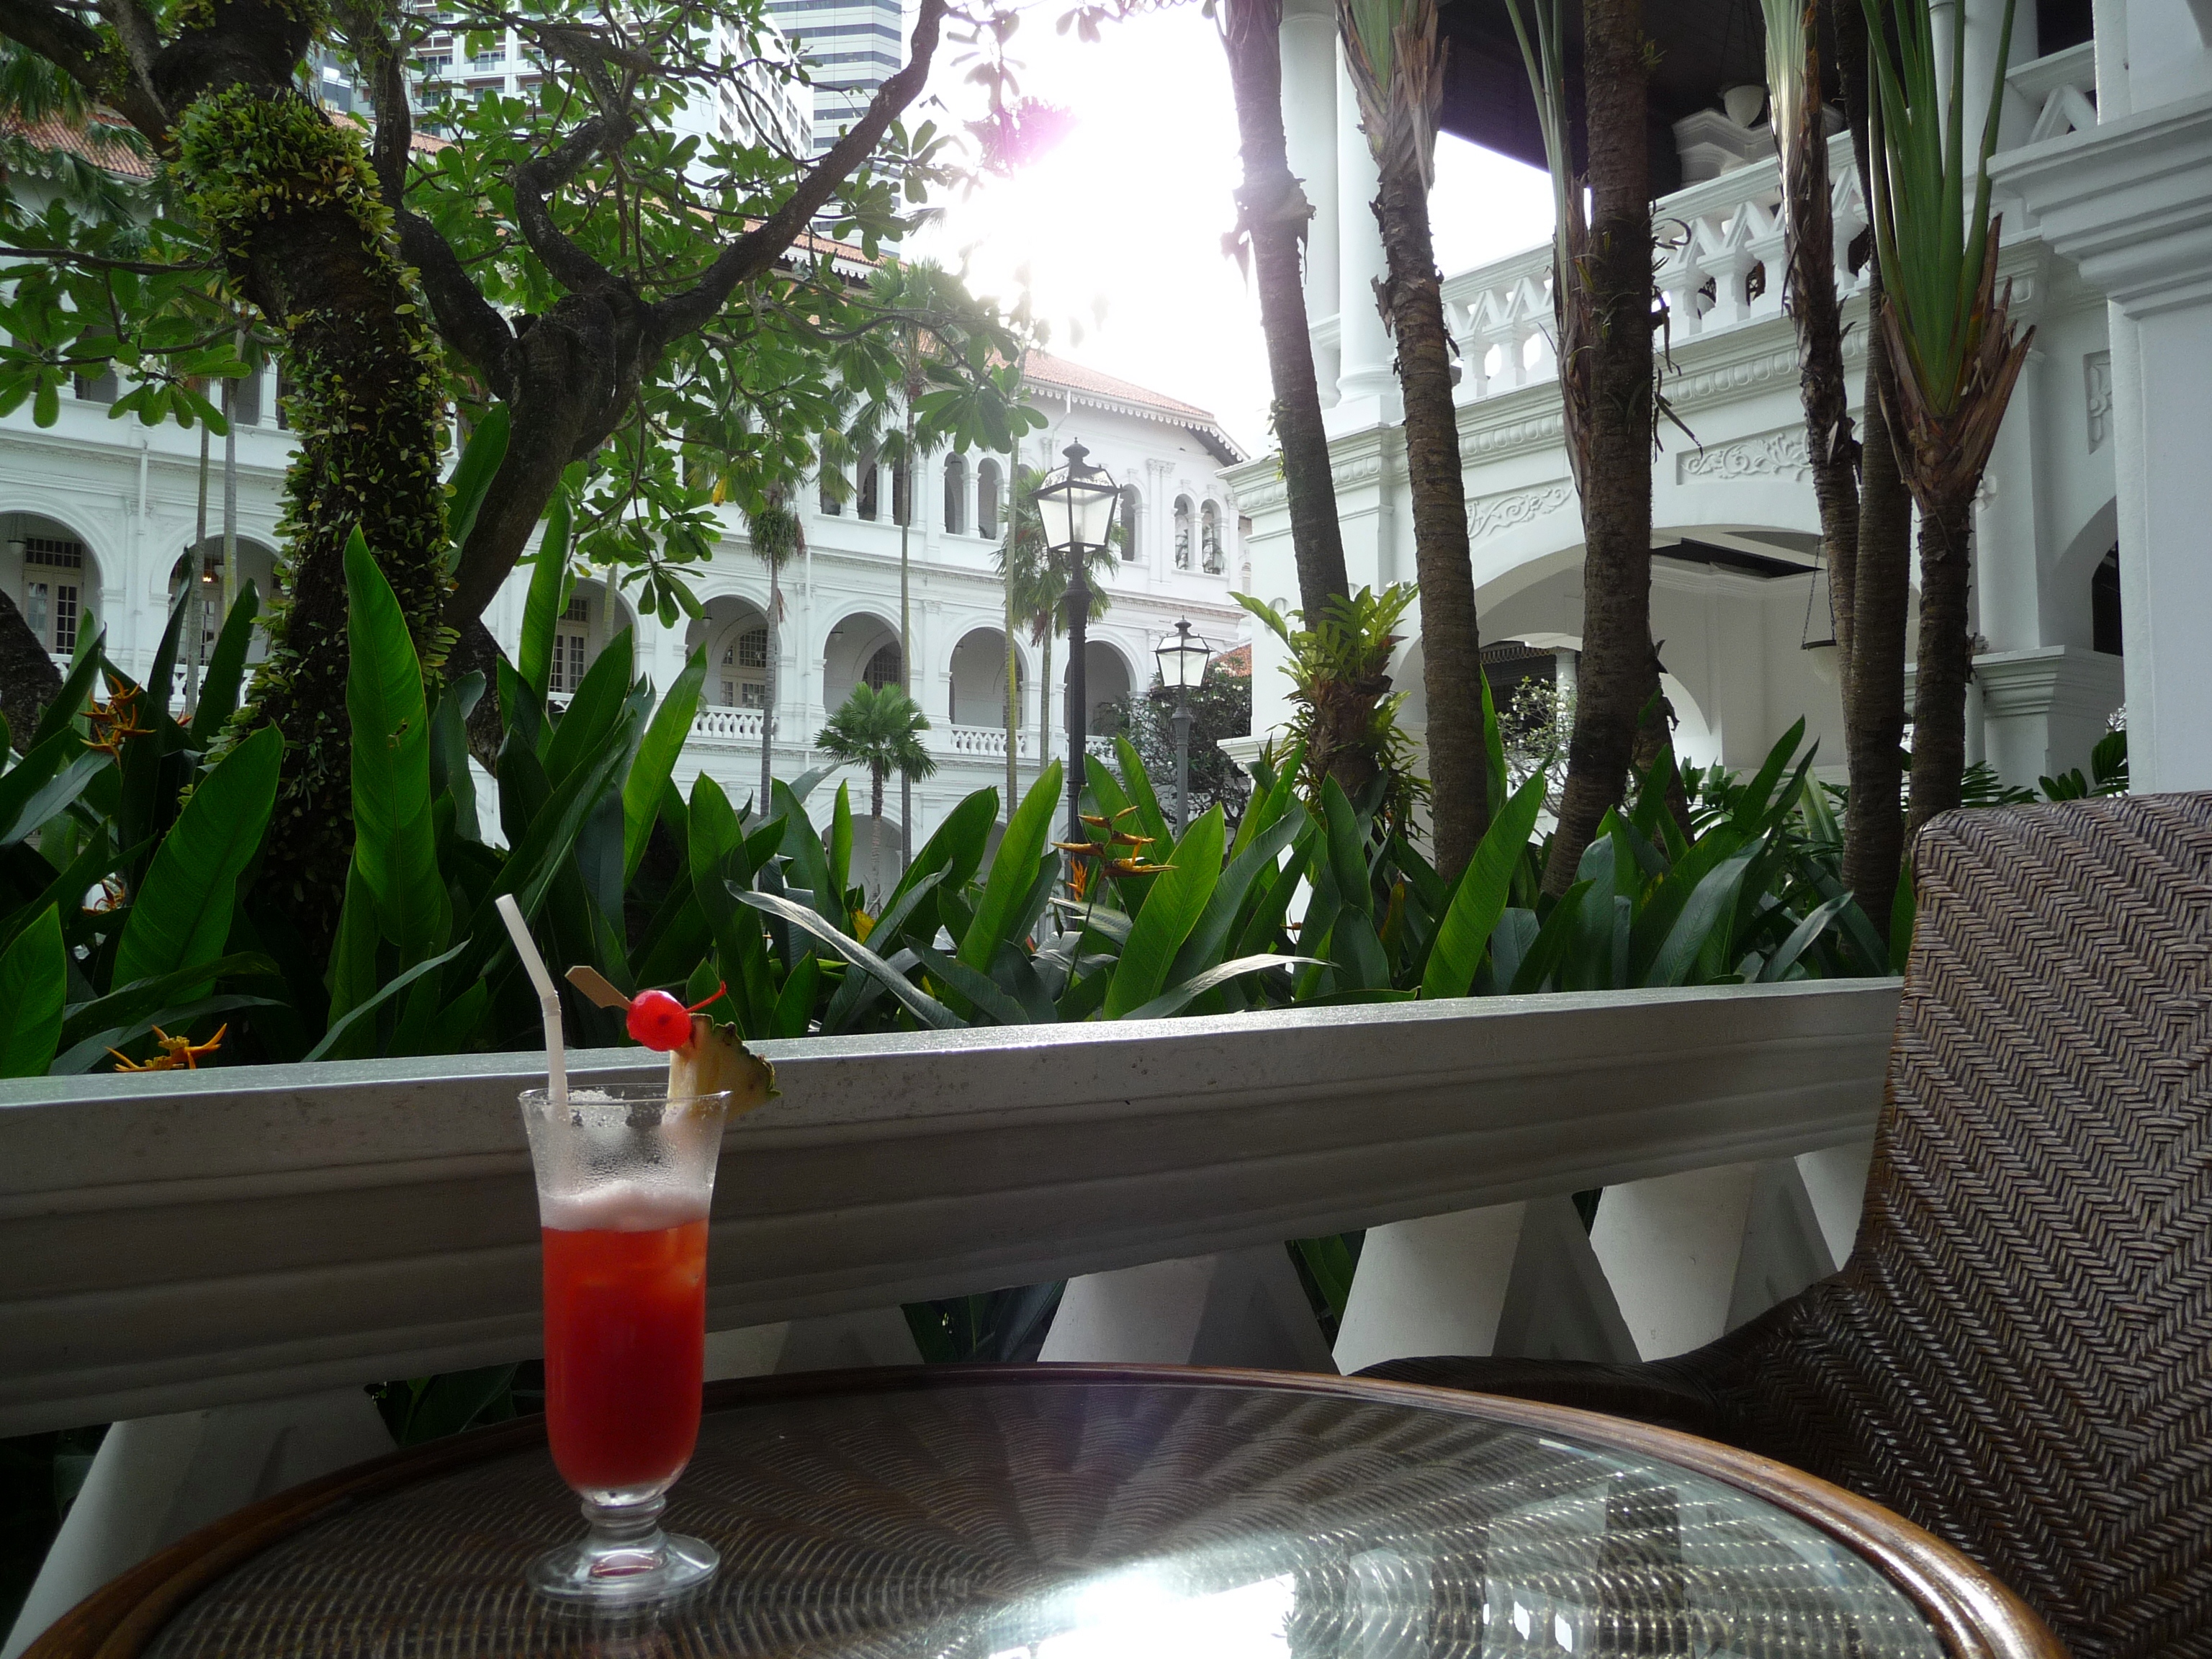 Drinking a Singapore Sling in Singapore